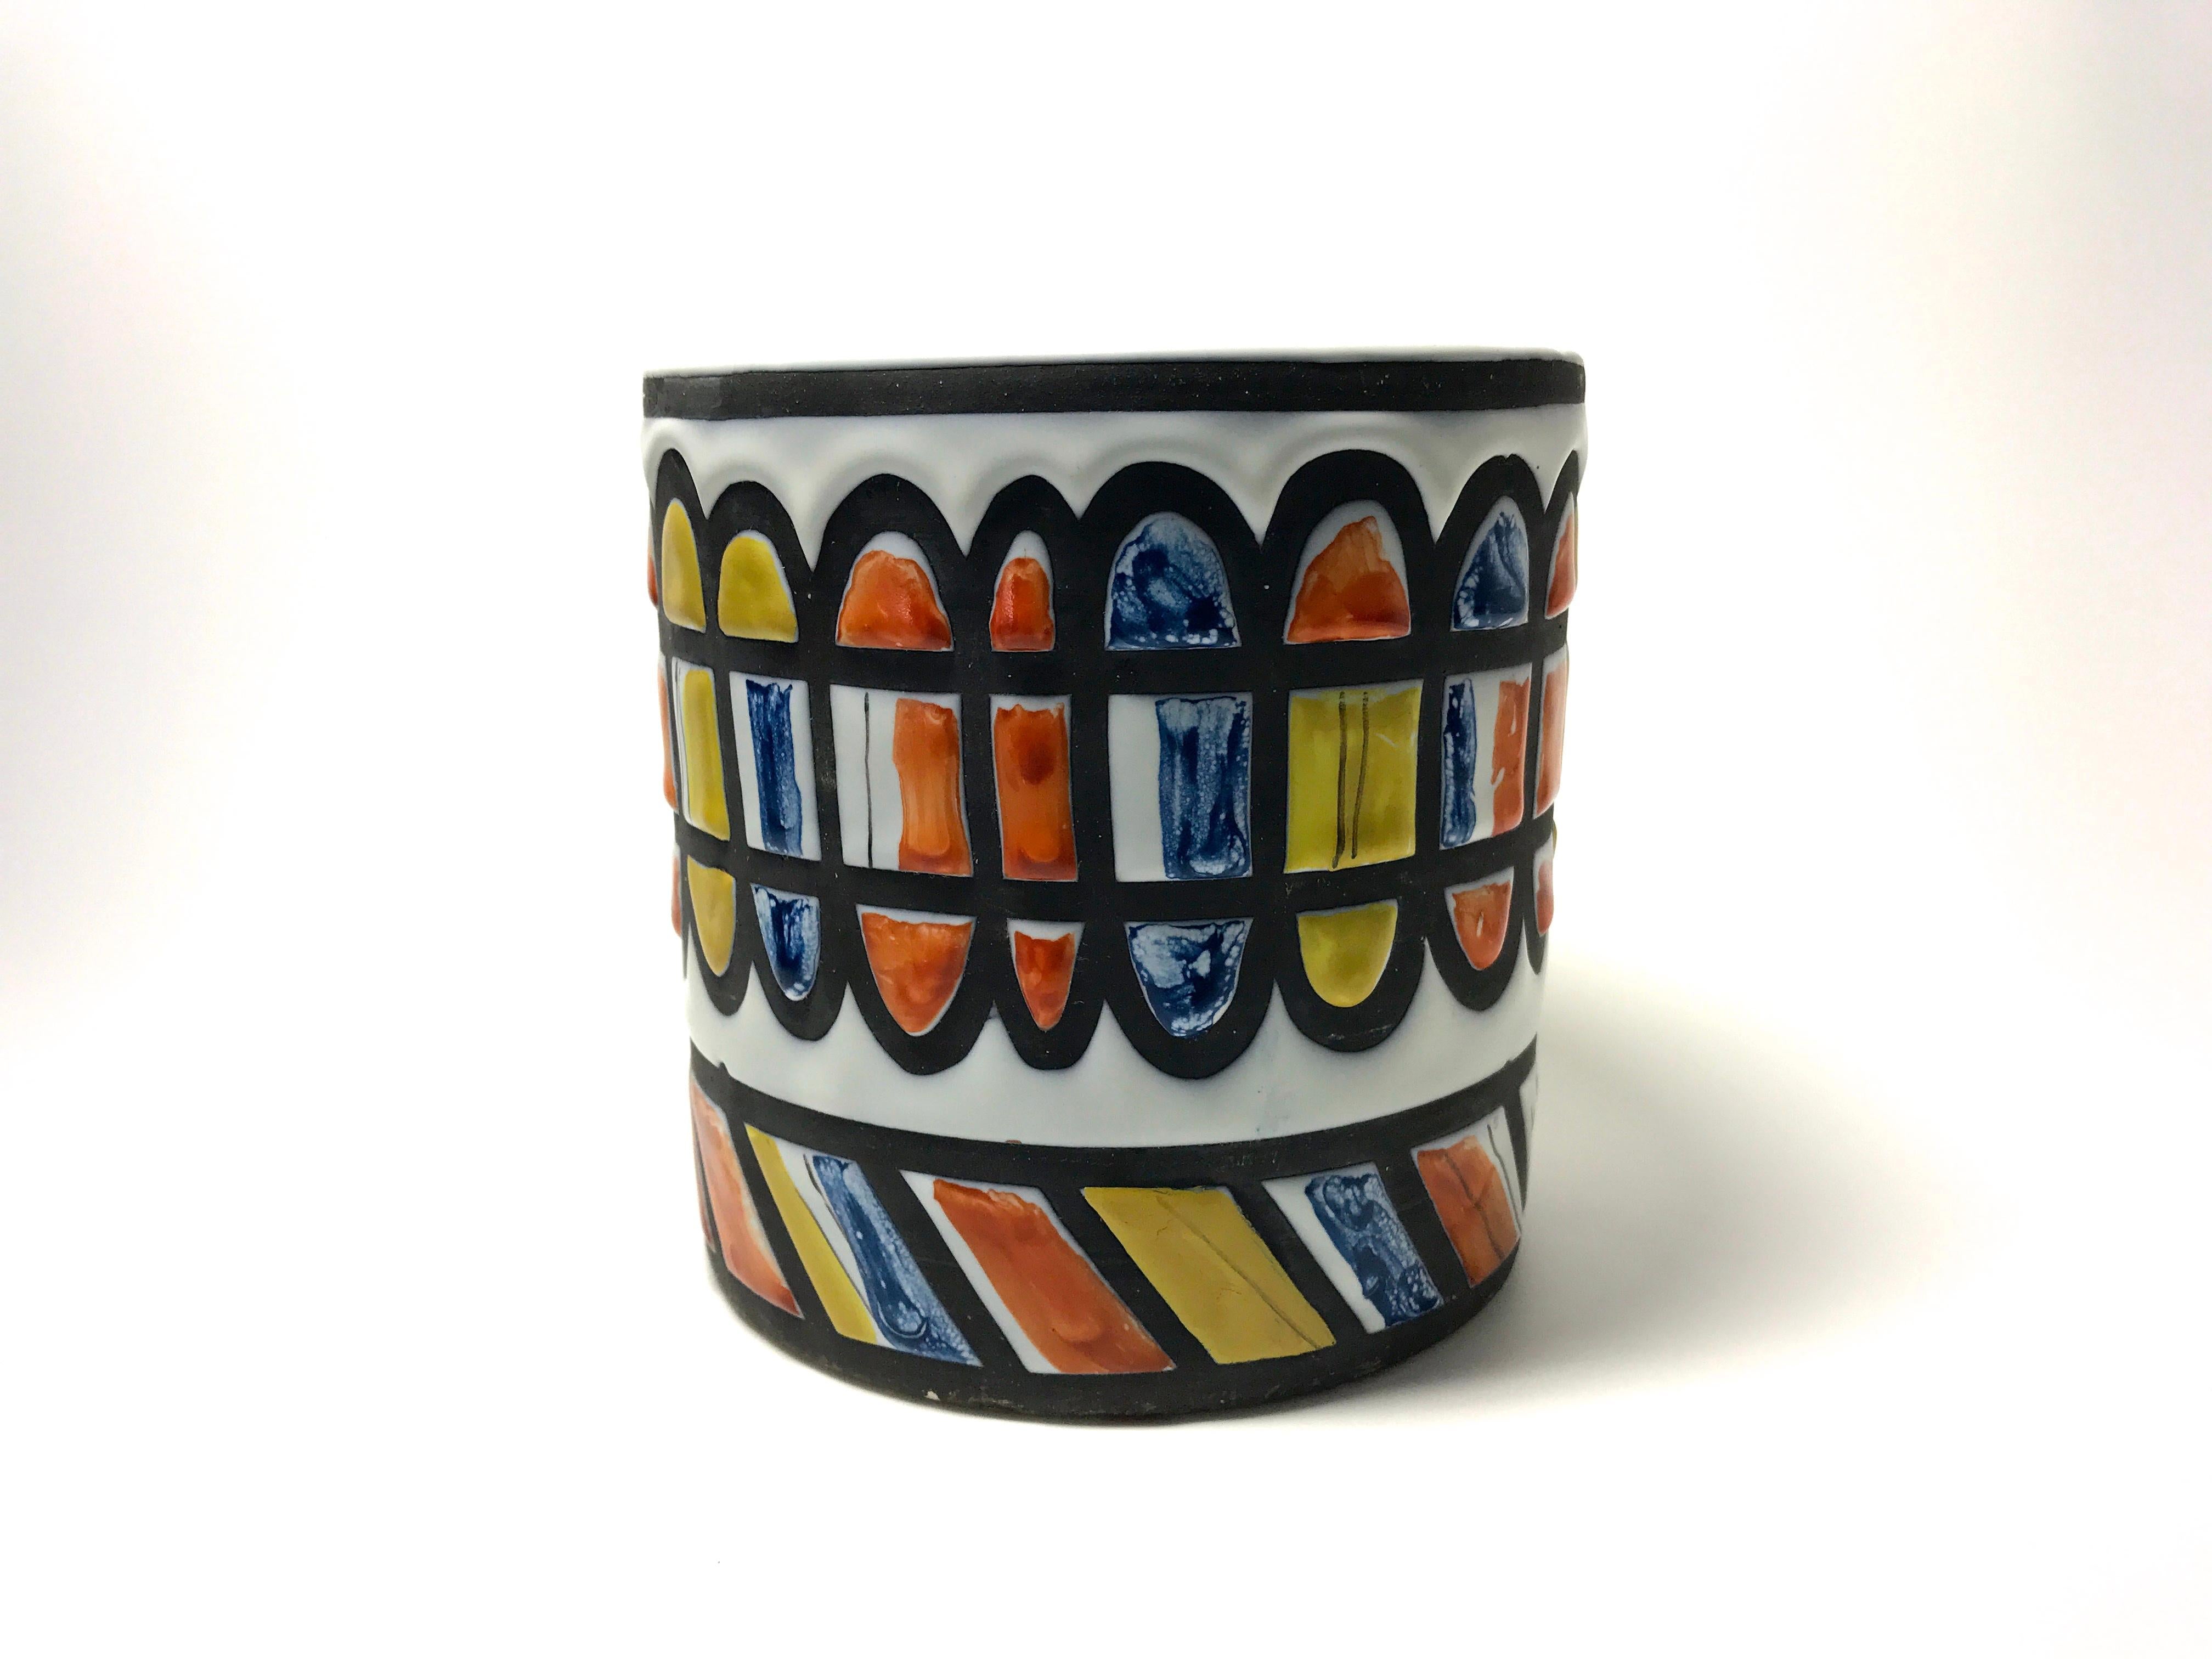 Superbly decorated ceramic cachepot by Roger Capron for Vallauris. The colors used are extremely strong and vibrant making it a striking piece,
circa 1950s
Signed Capron, Vallauris
Measures: Height 5.5 inch, diameter 5 inch
Excellent vibrant